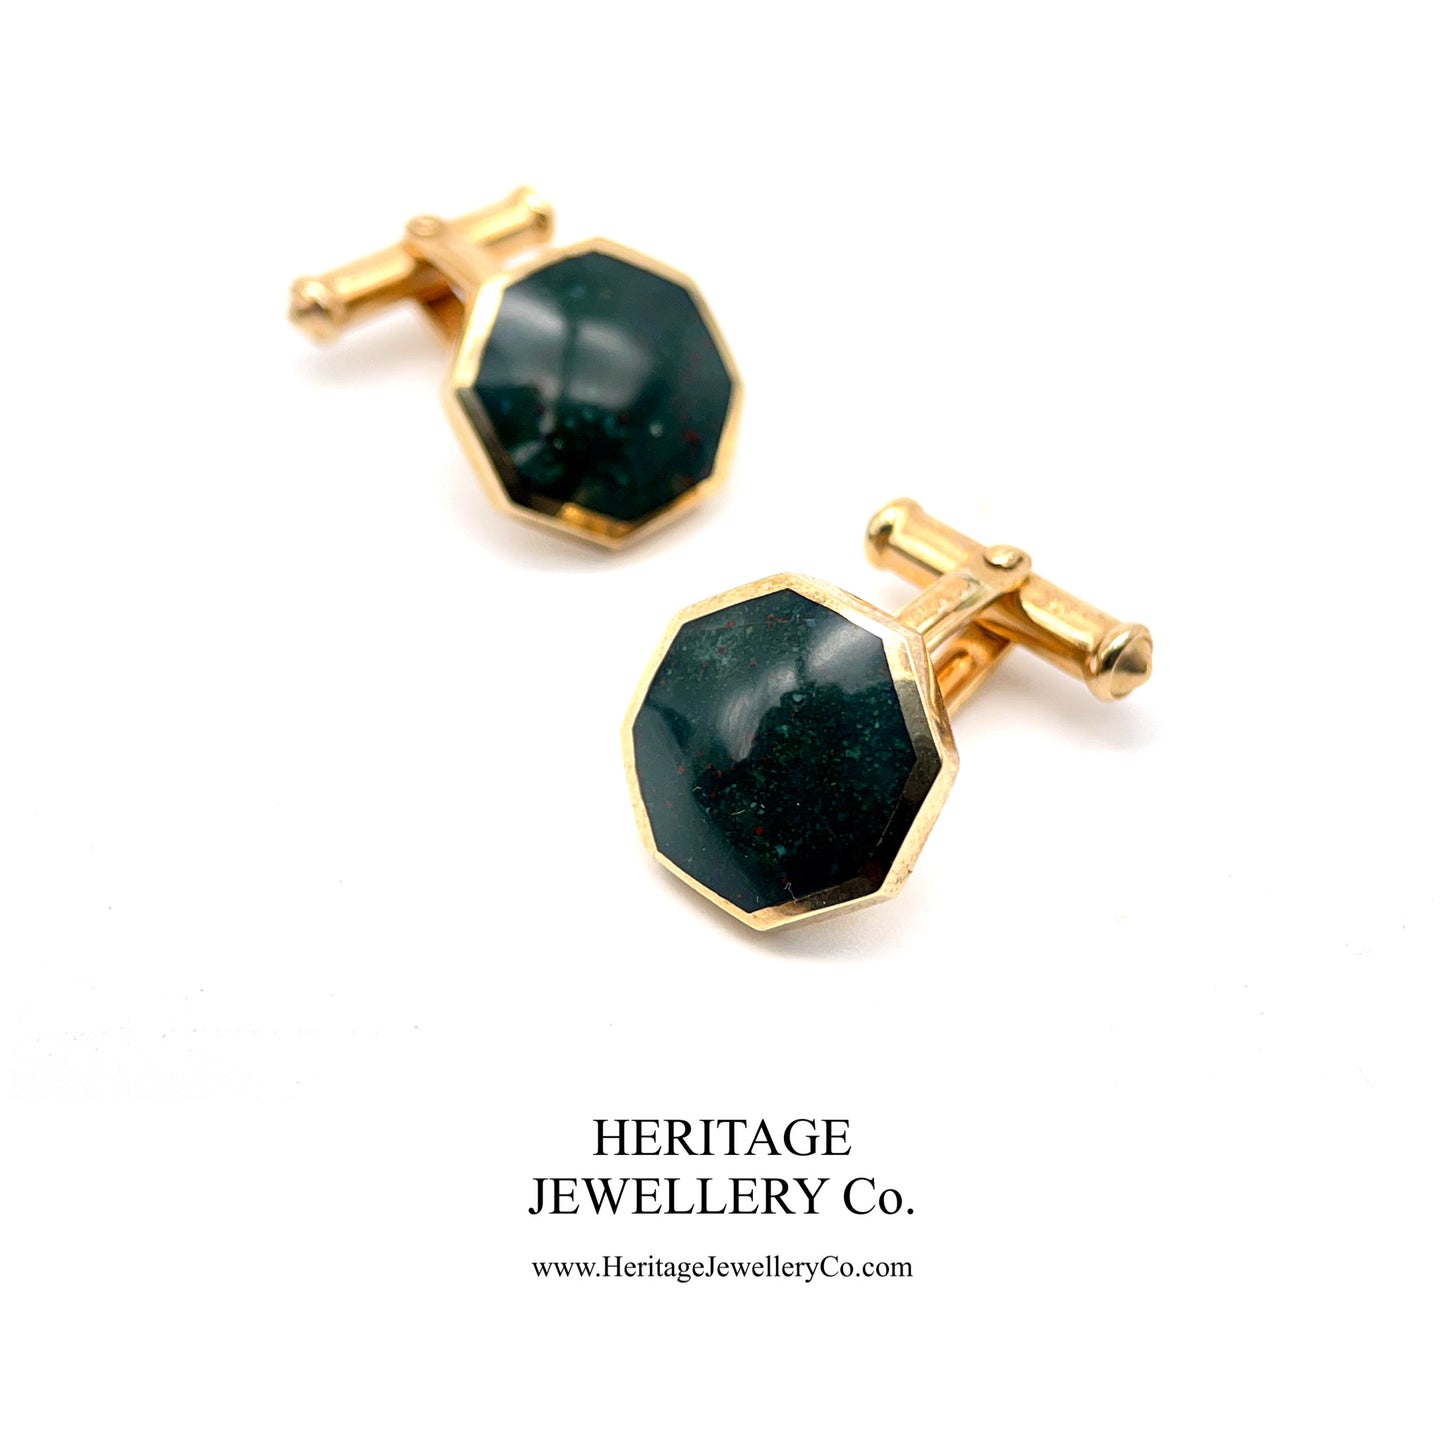 Vintage Gold and Bloodstone Cufflinks with Antique Box (9ct gold)